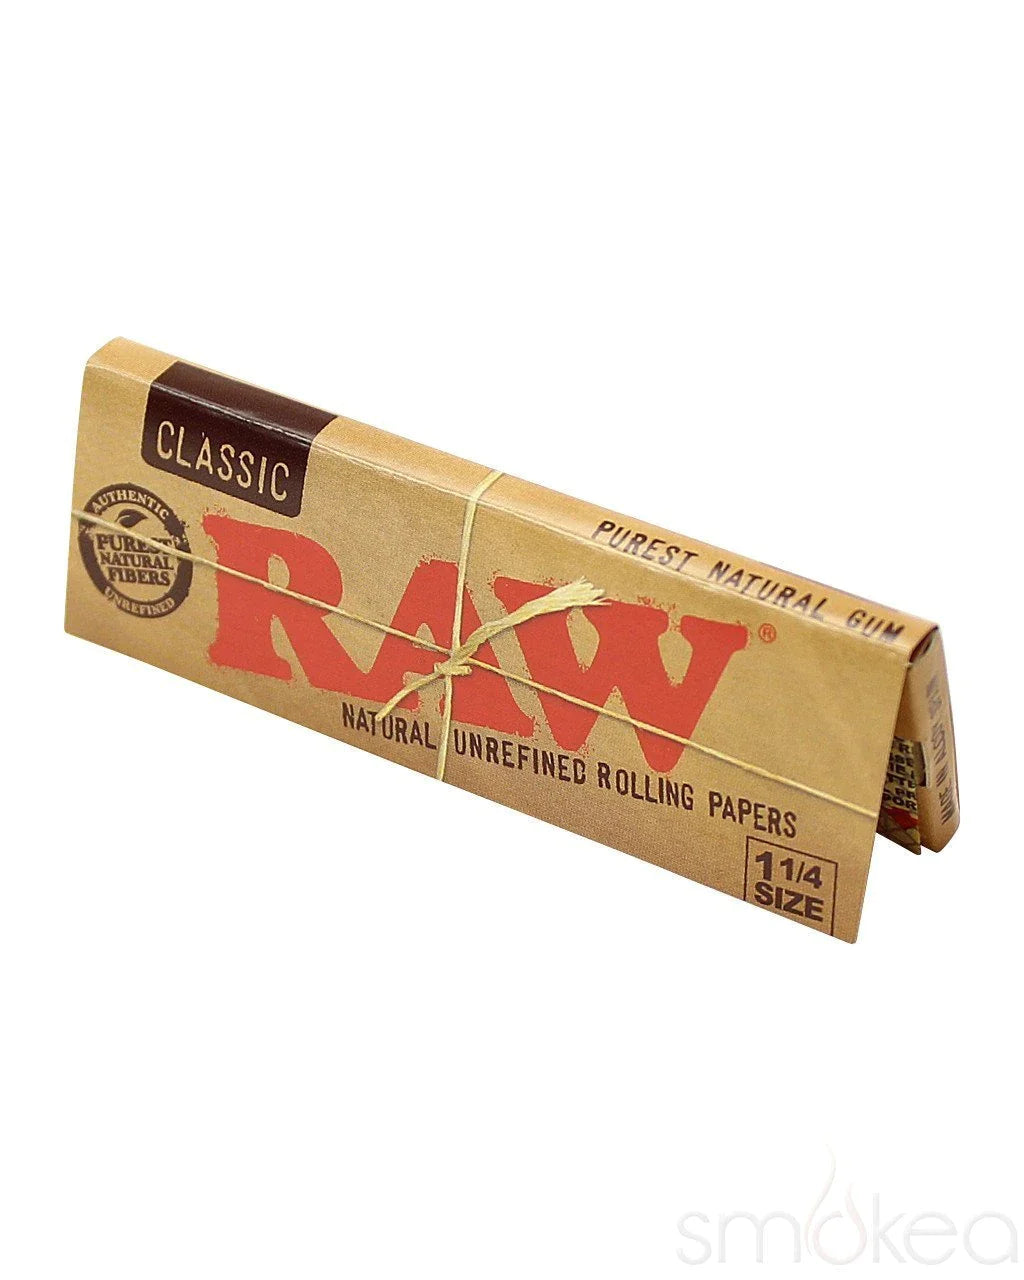 Raw Classic 1 1/4 Size Brown Rolling Paper (Full Box) - Bittchaser Smoke Shop